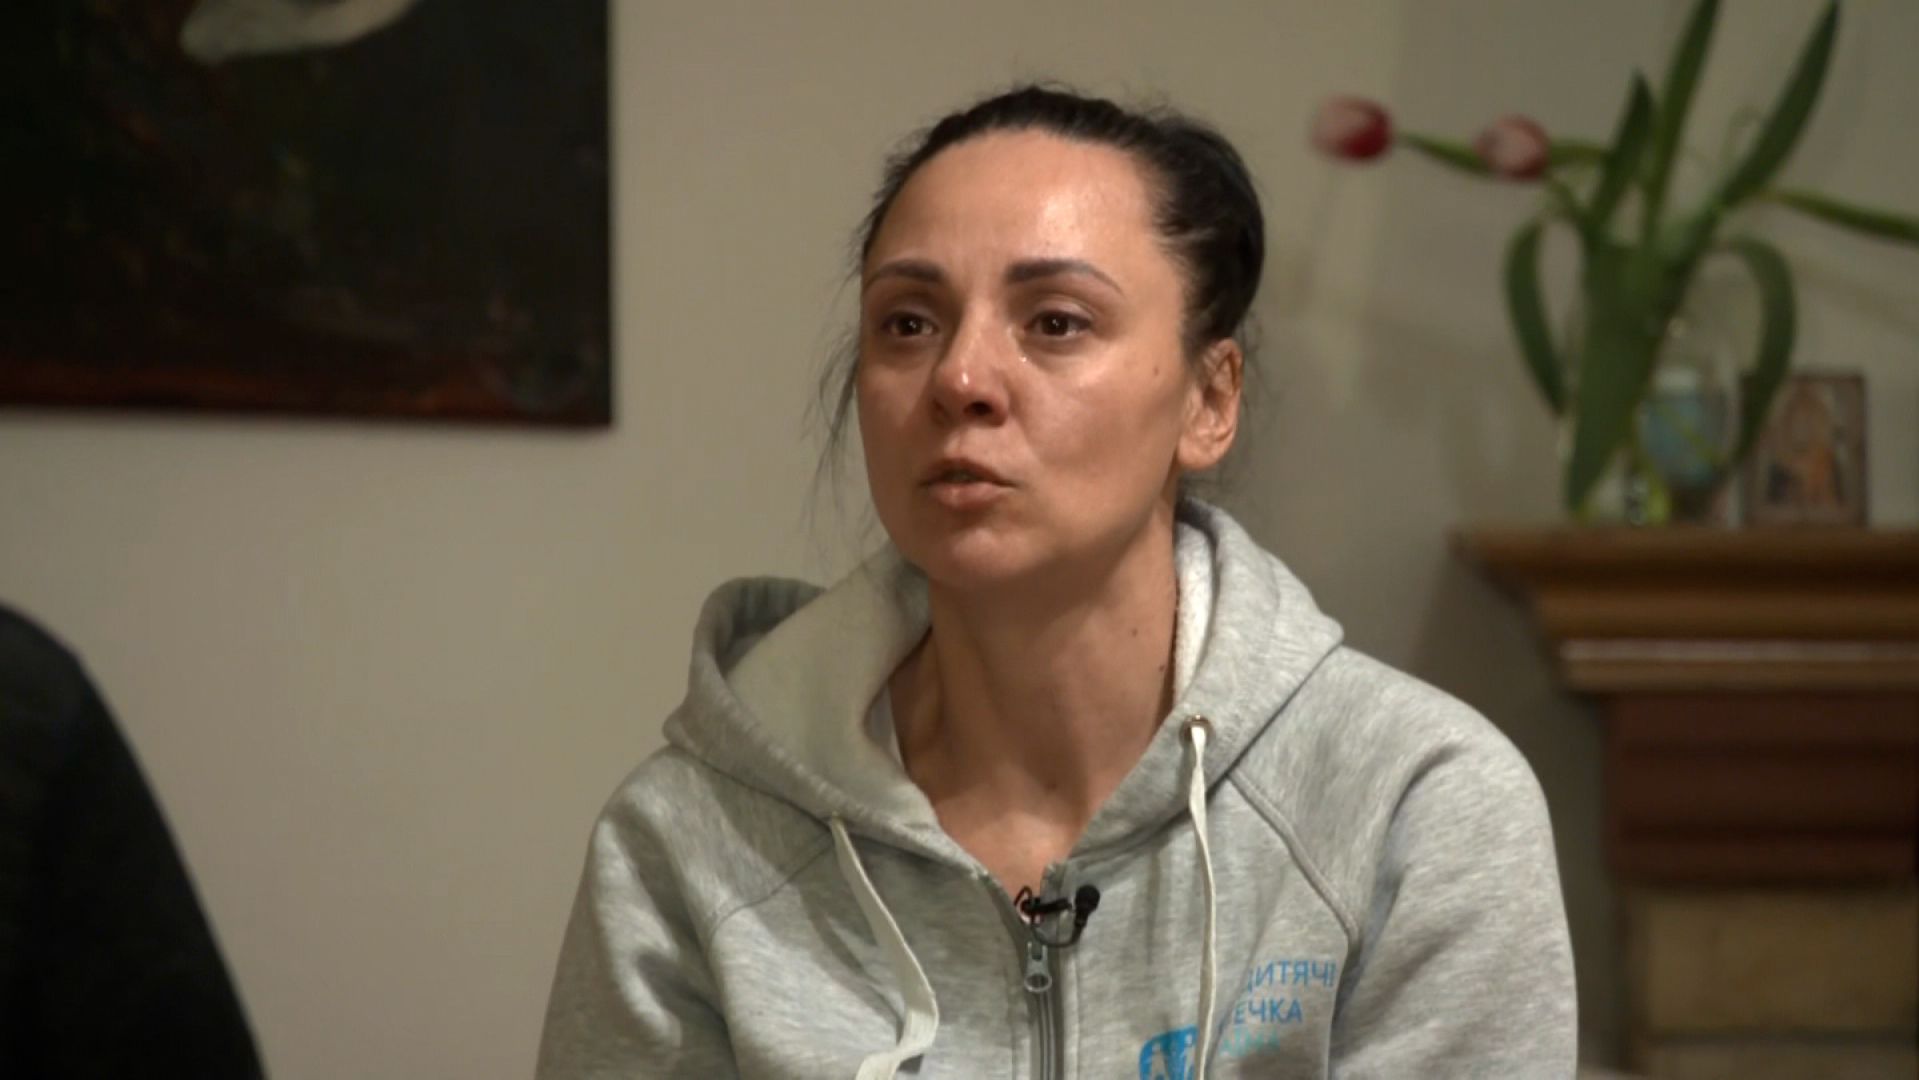 Oksana, who is a psychologist, says one of the children witnessed a family being shot.